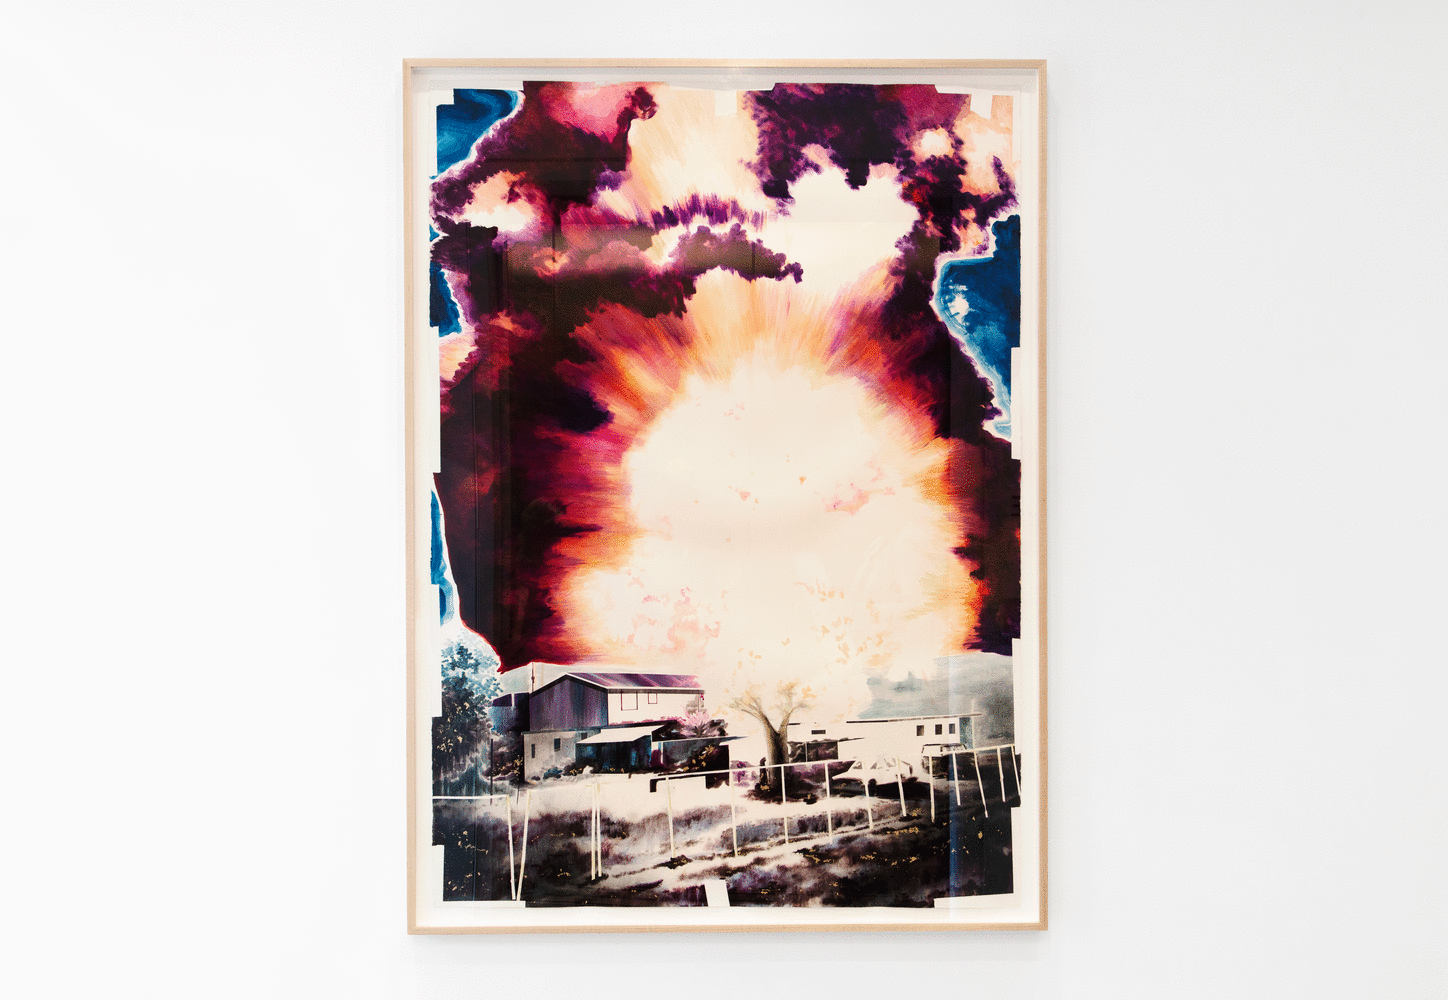 A large colorful artwork depicting an explosion with a house in front of it hangs on a white gallery wall